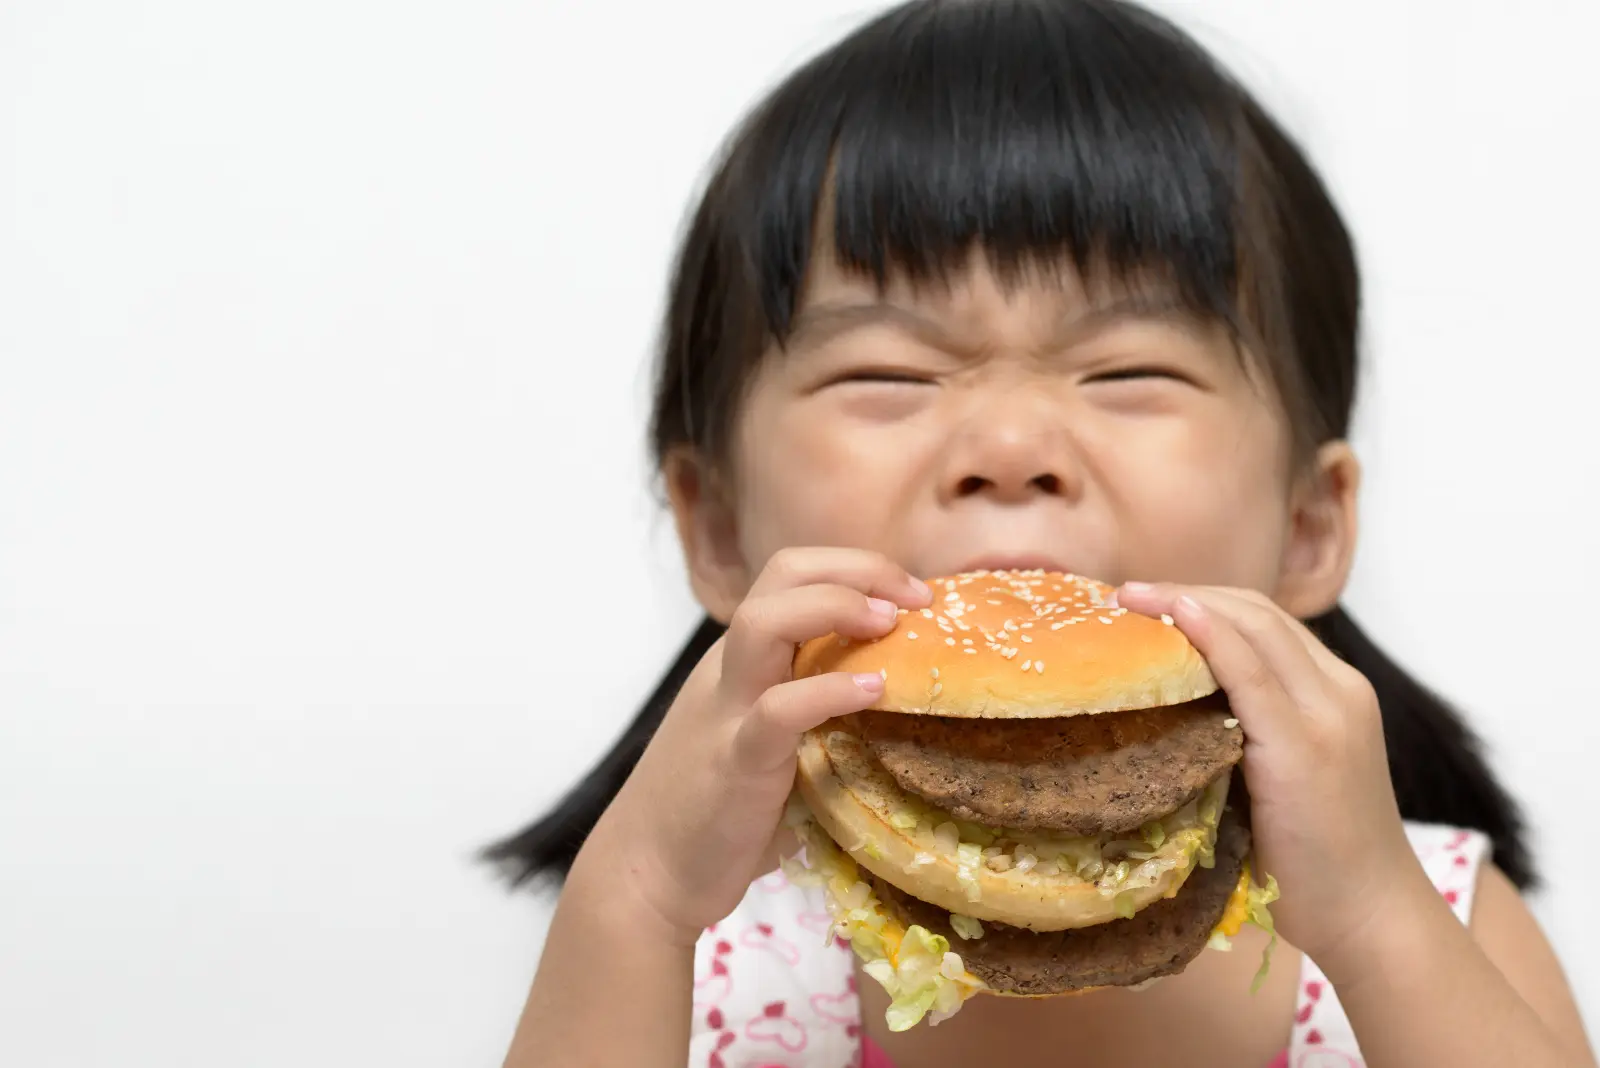 Climate change and ultra-processed food: the main threats to children’s health